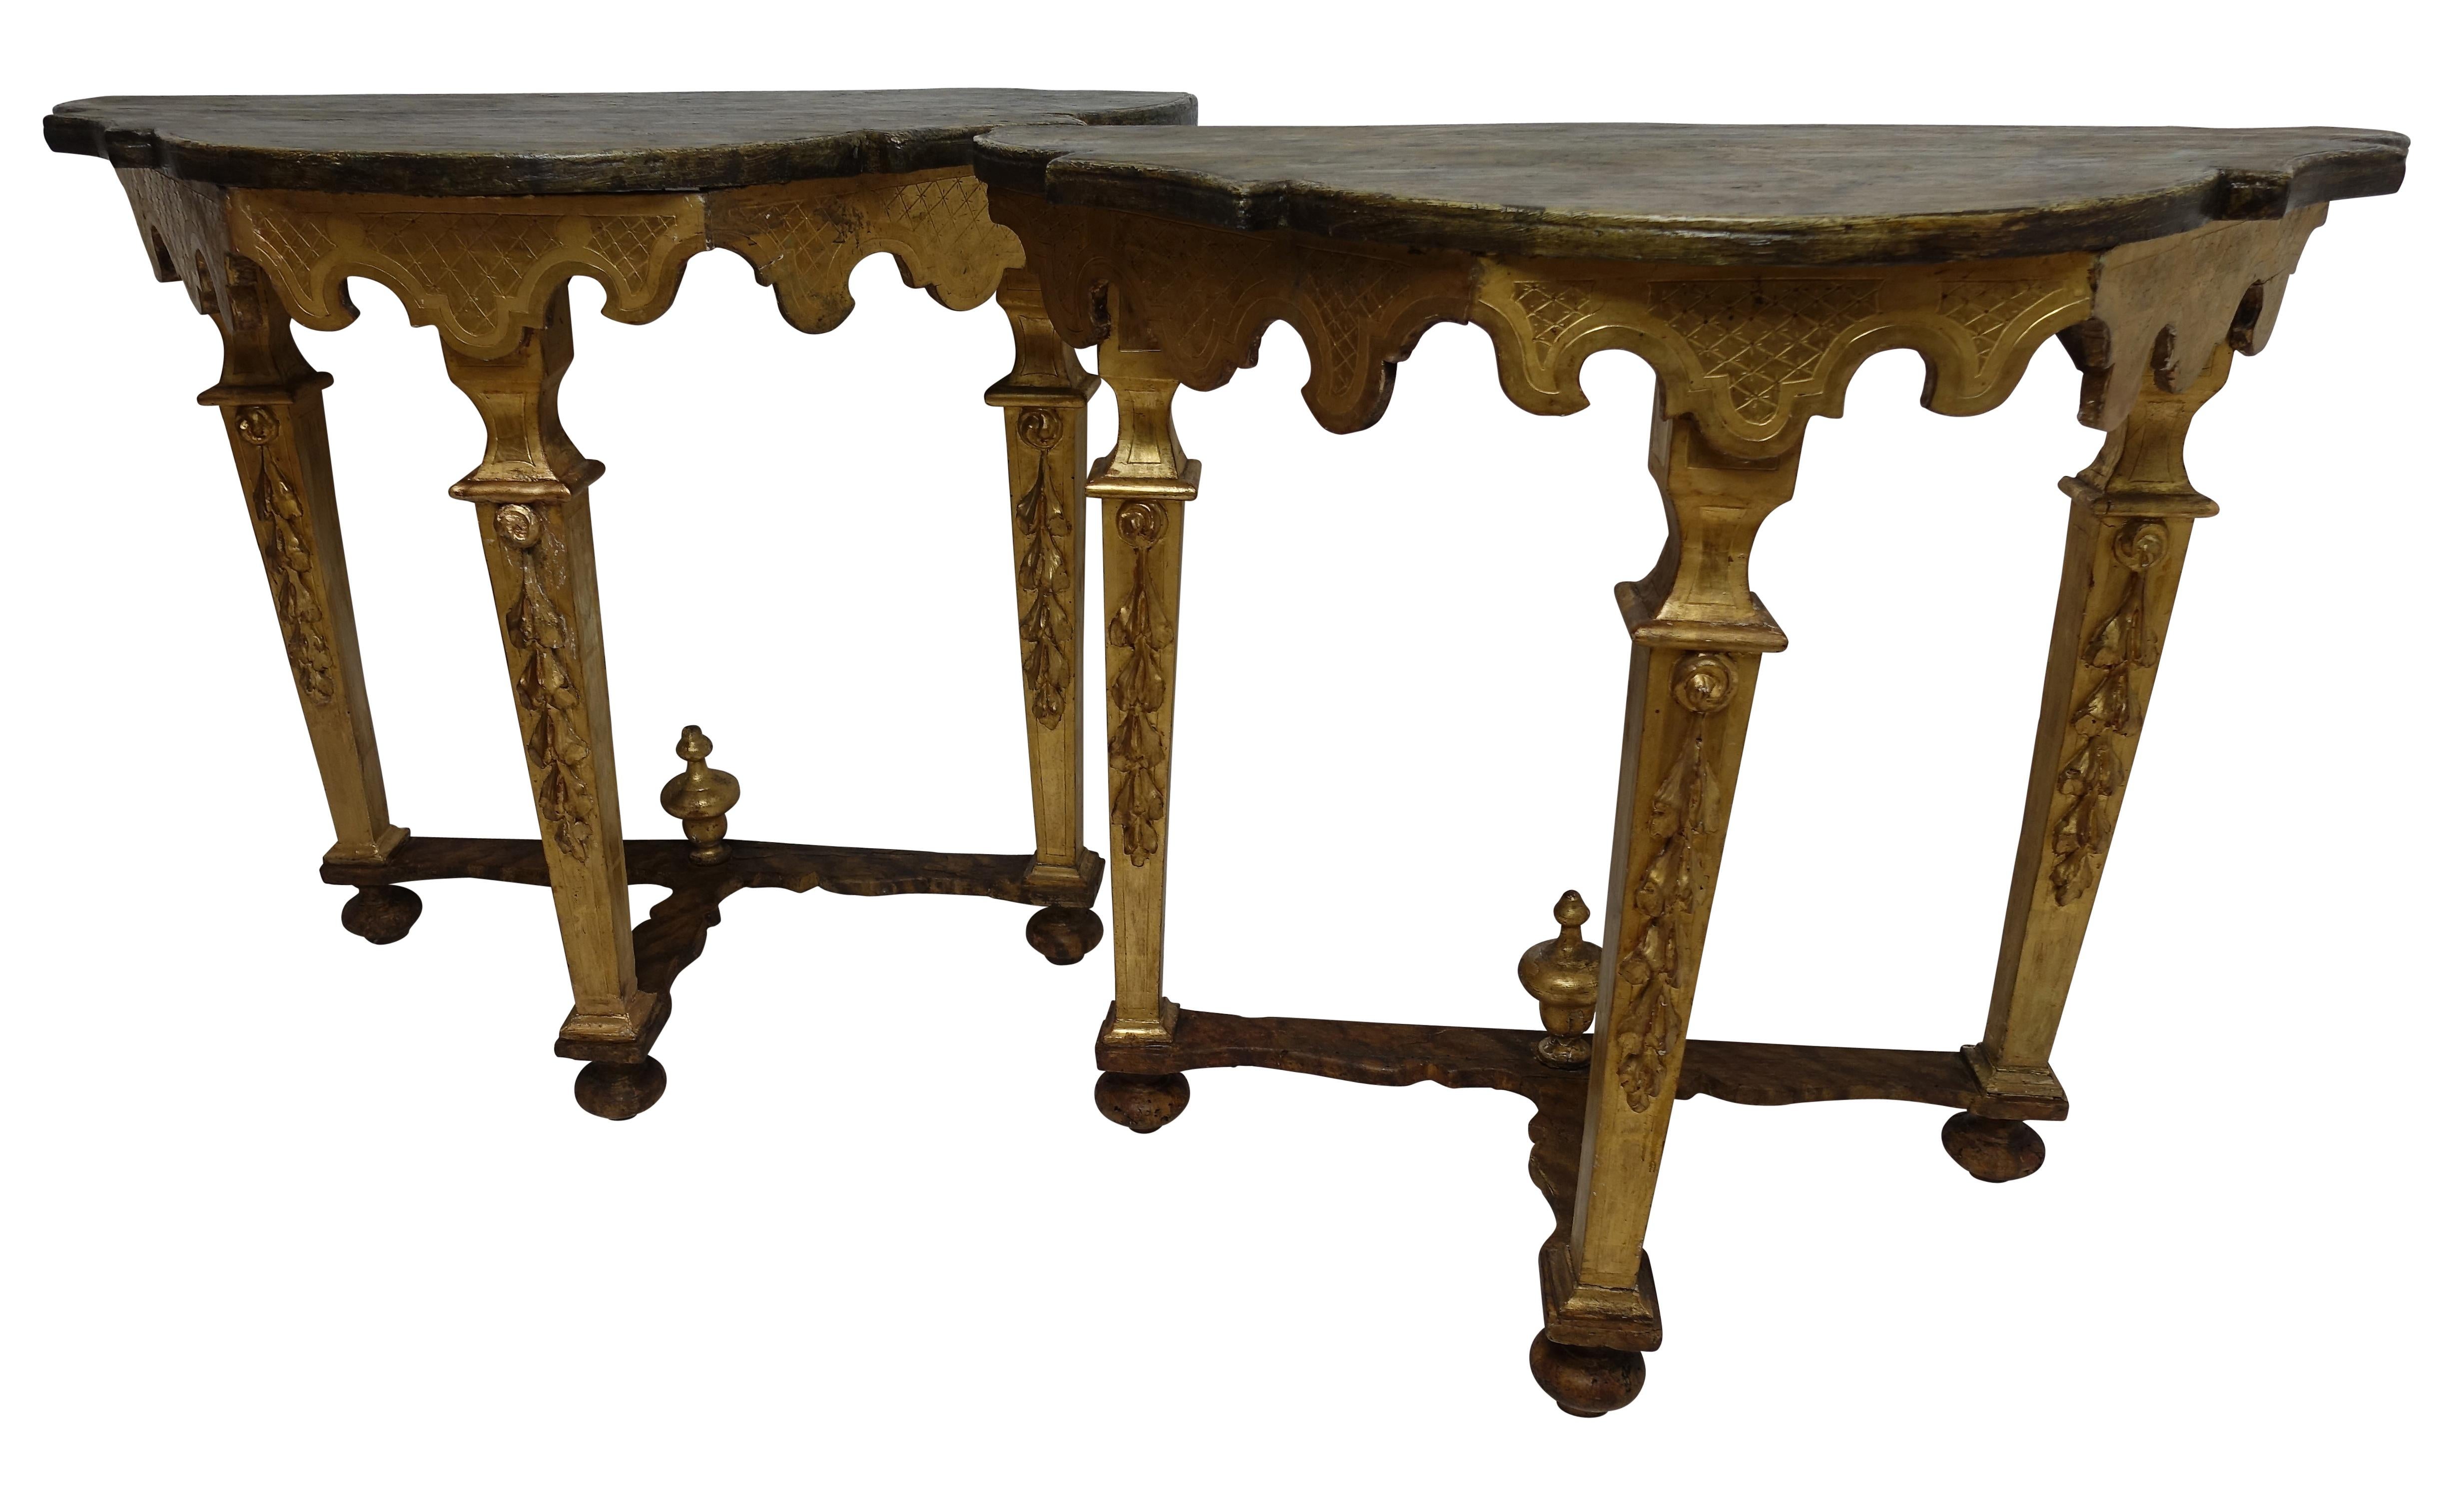 Hand-Carved Pair of Florentine Style Carved and Painted Consoles, Italian, 18th Century For Sale